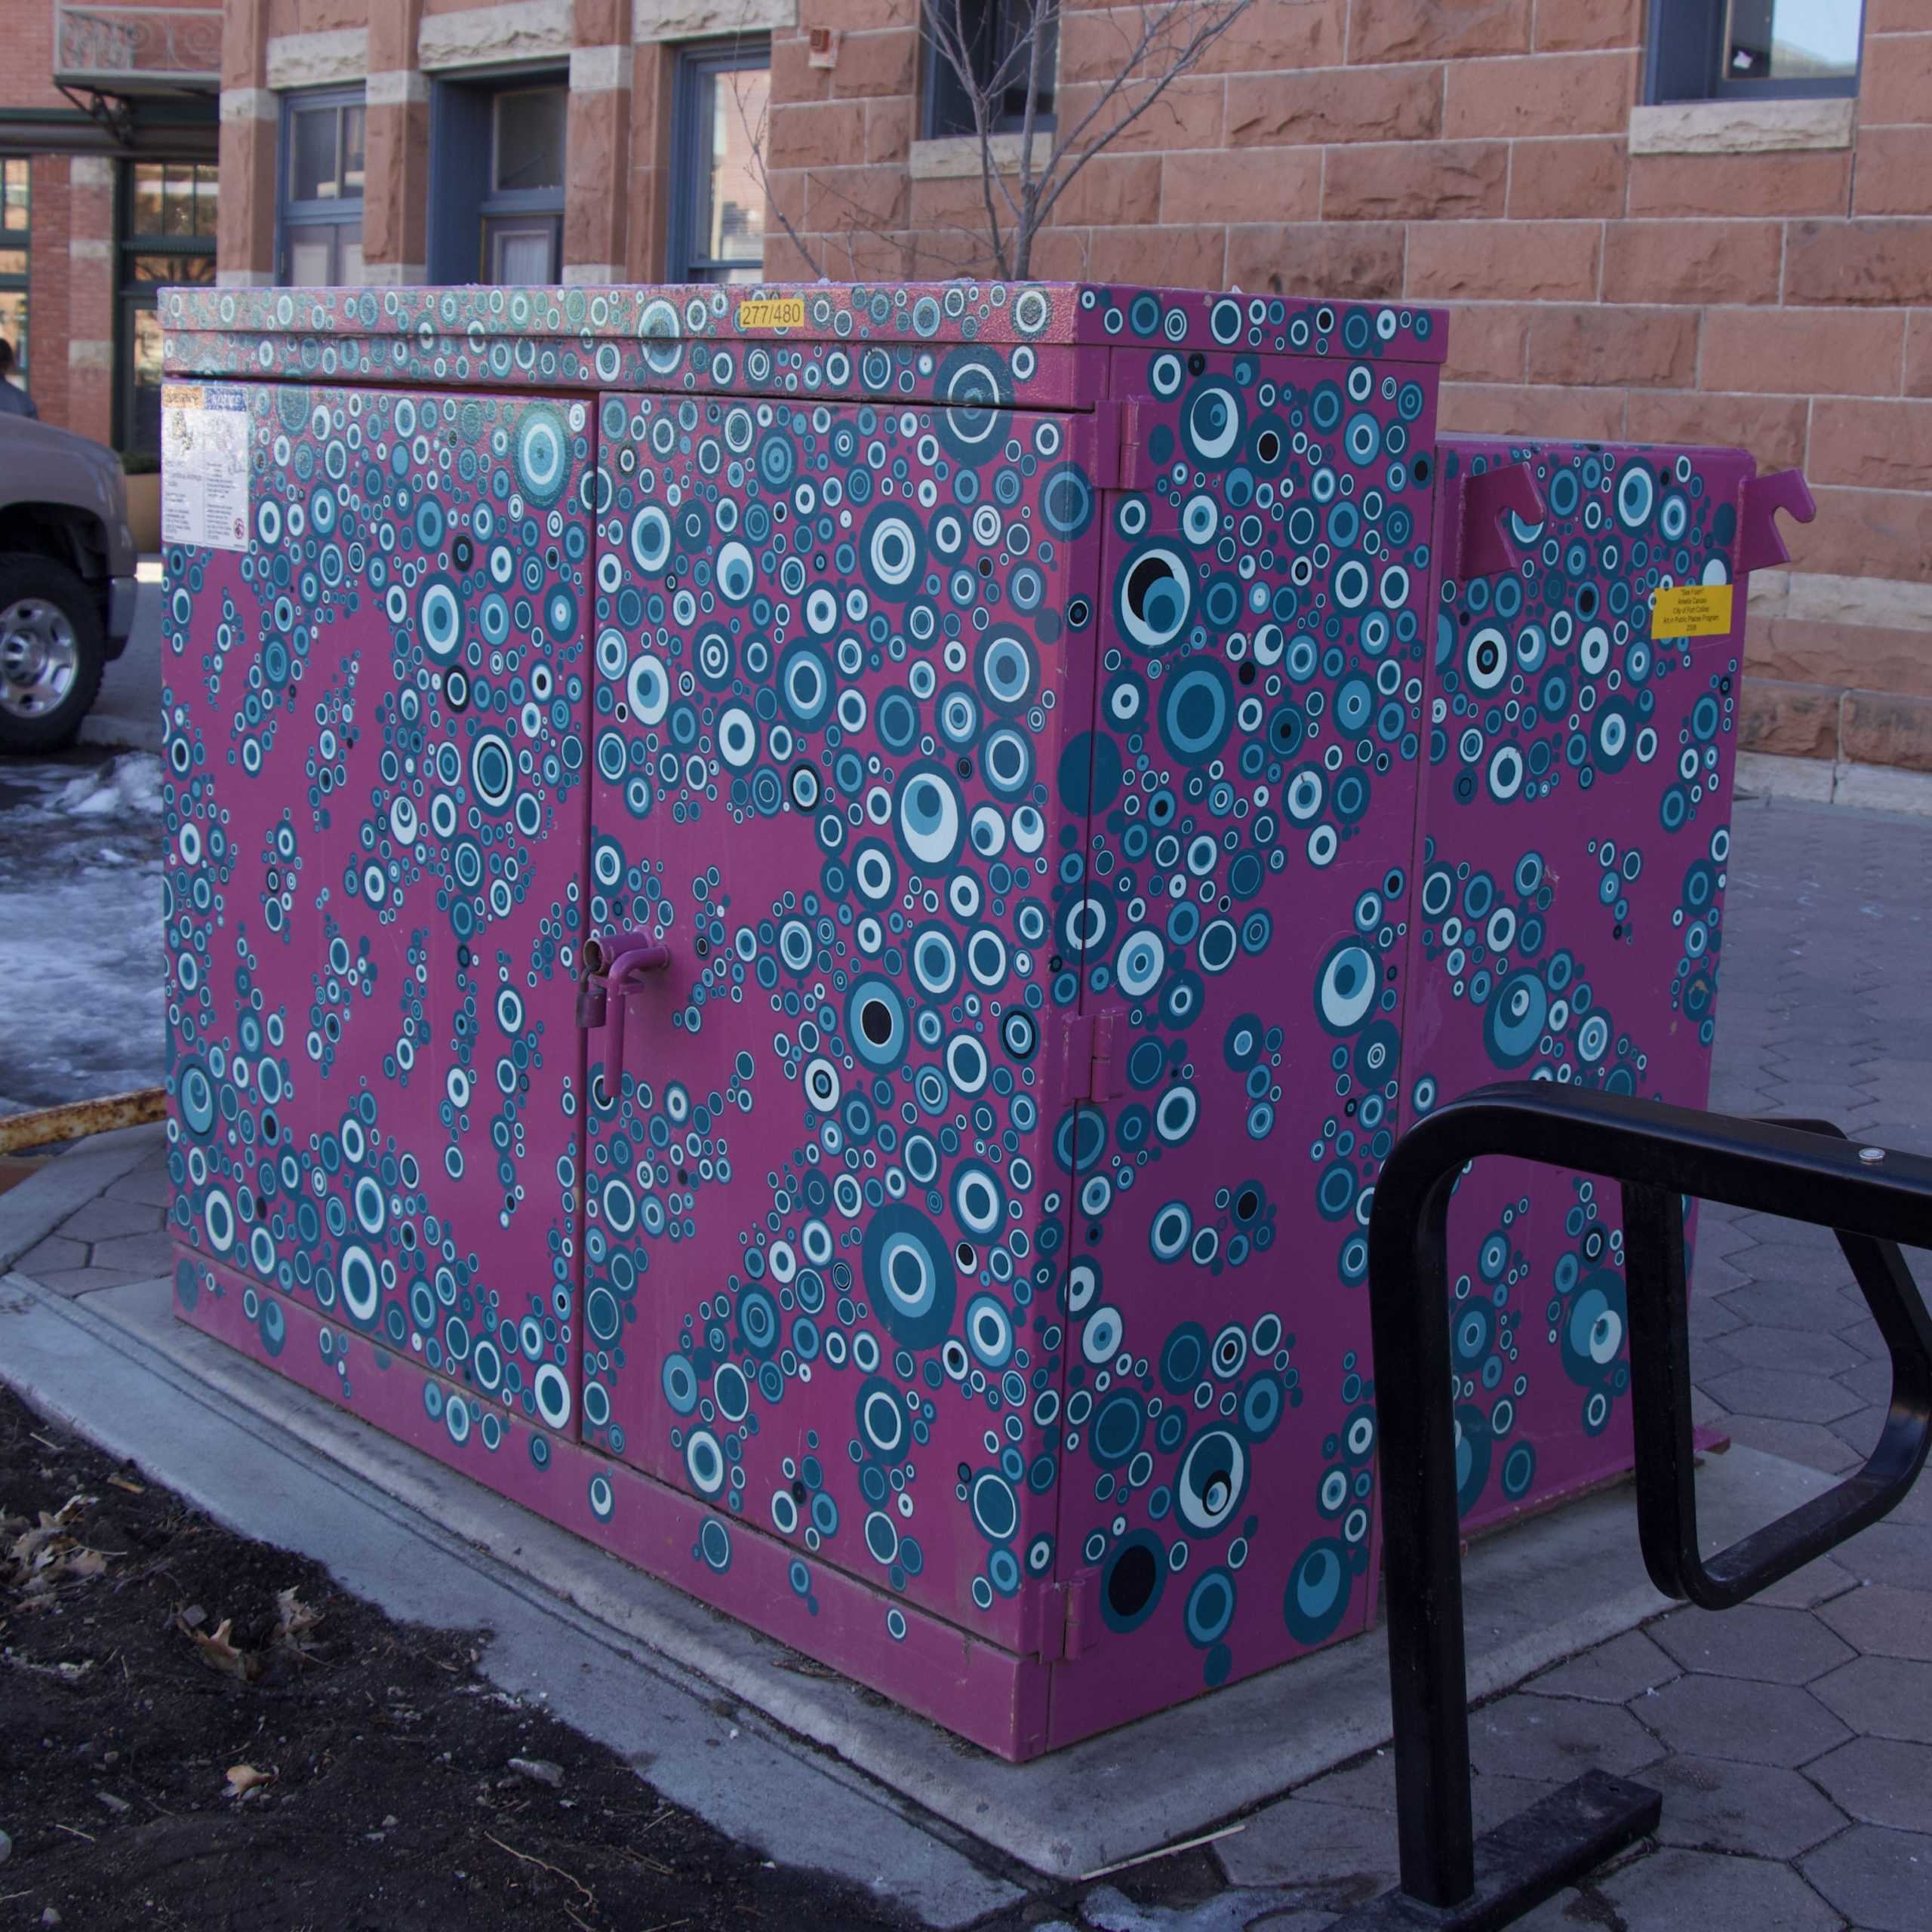 Public+Art+In+Fort+Collins+Adds+Color+to+the+Dark+Times